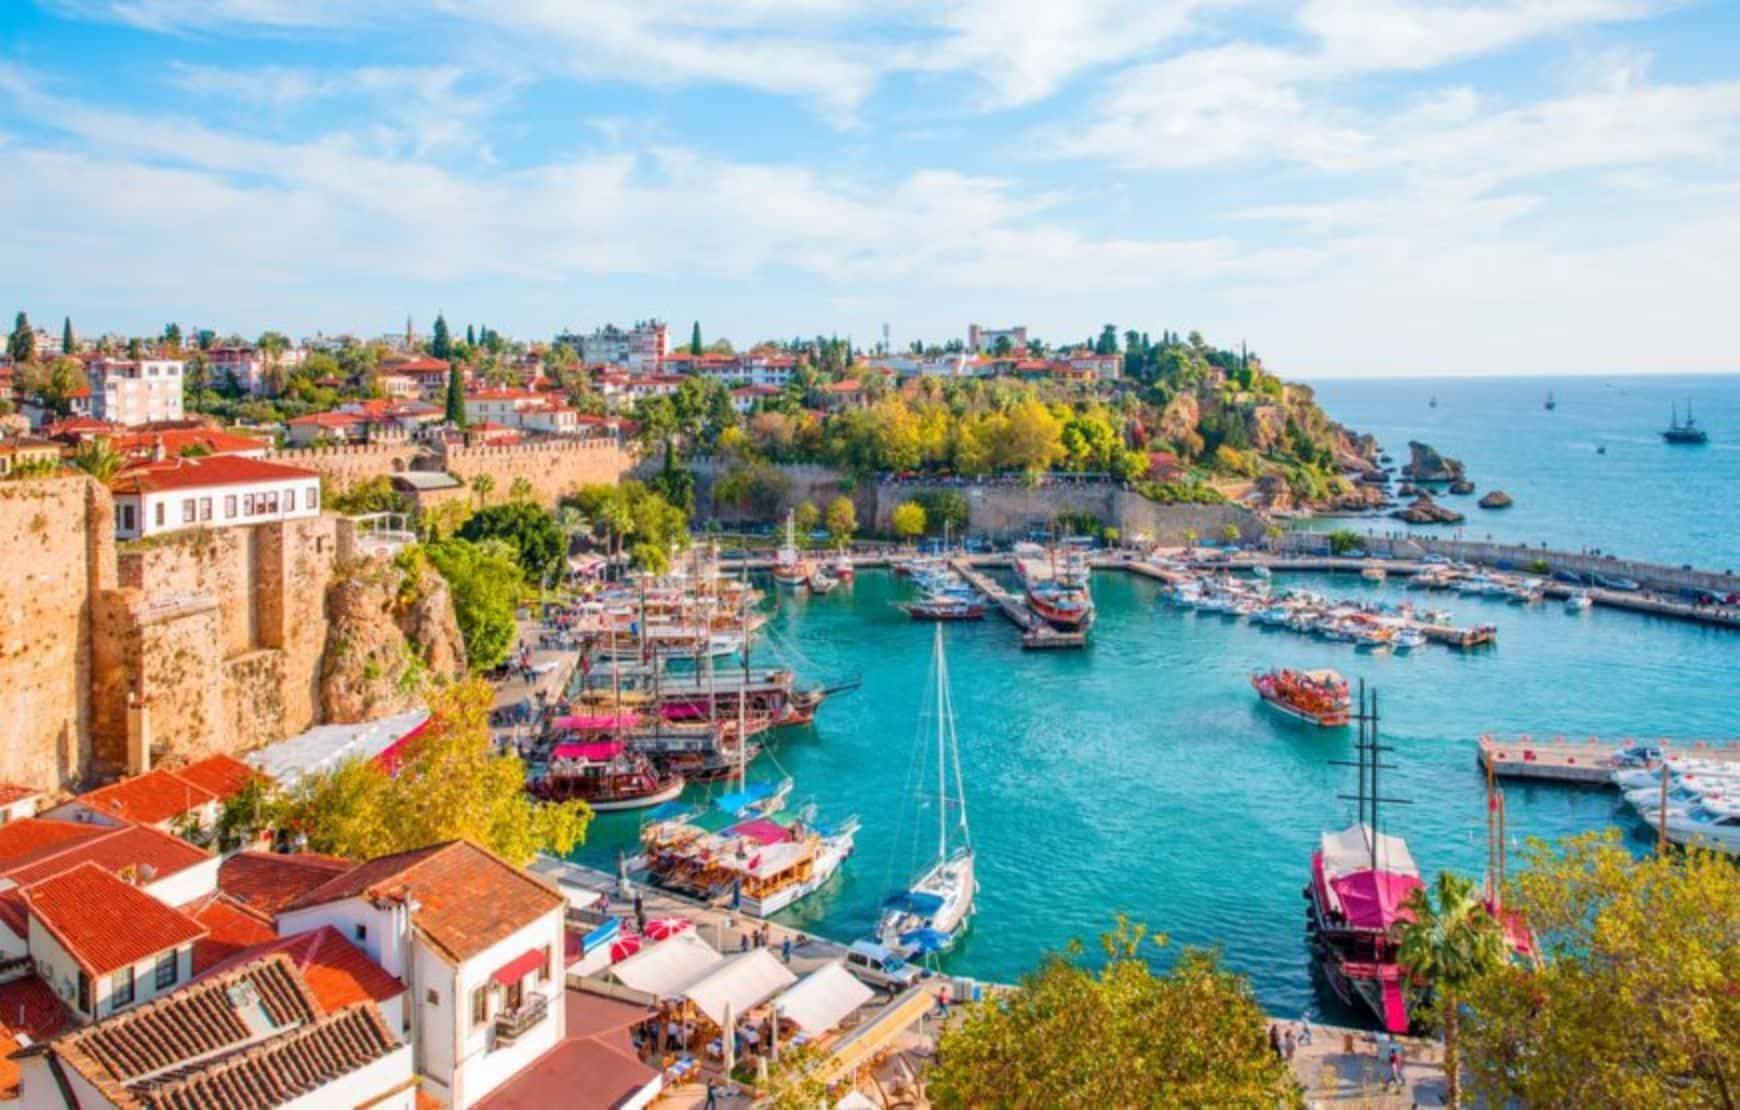 visit Kaleici Port in Antalya with our Four Cities in One Private Tour